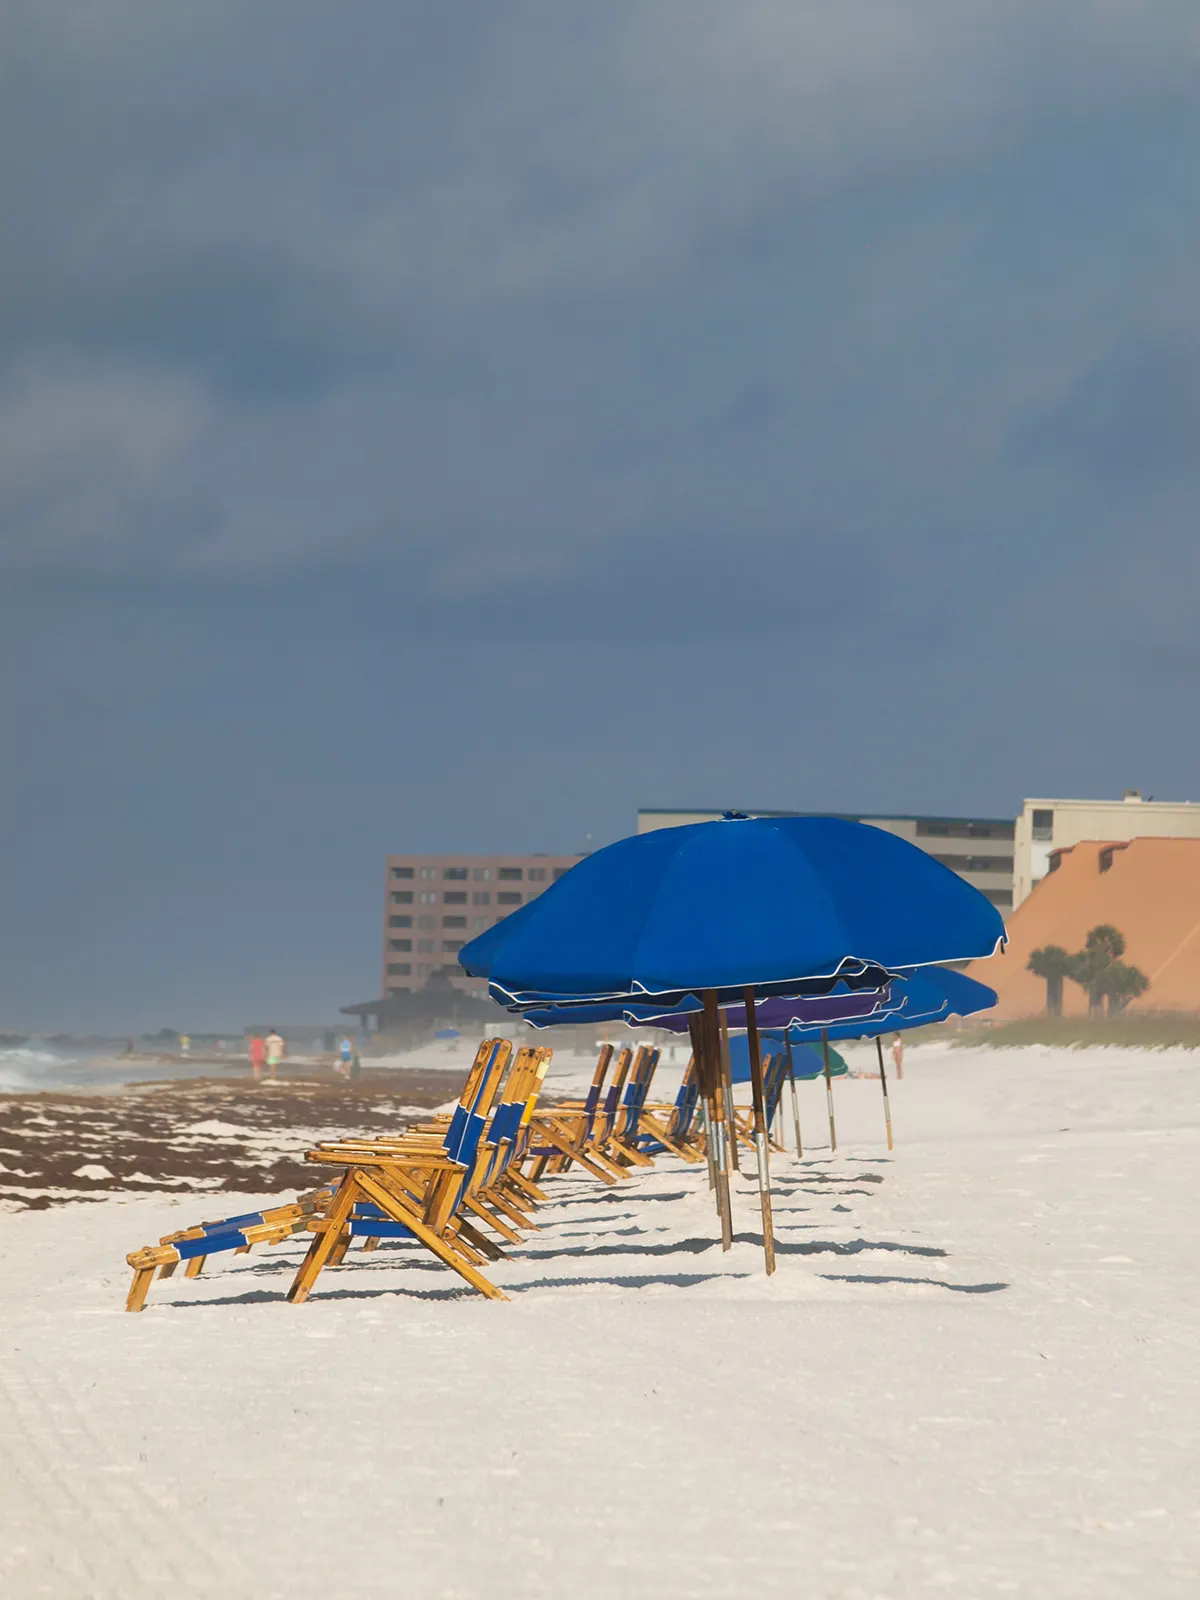 Chairs on a Beach | Furnace Repair in Destin | Emerald Coast Air Conditioning and Heating | AirConditioningRepairPensacola.com